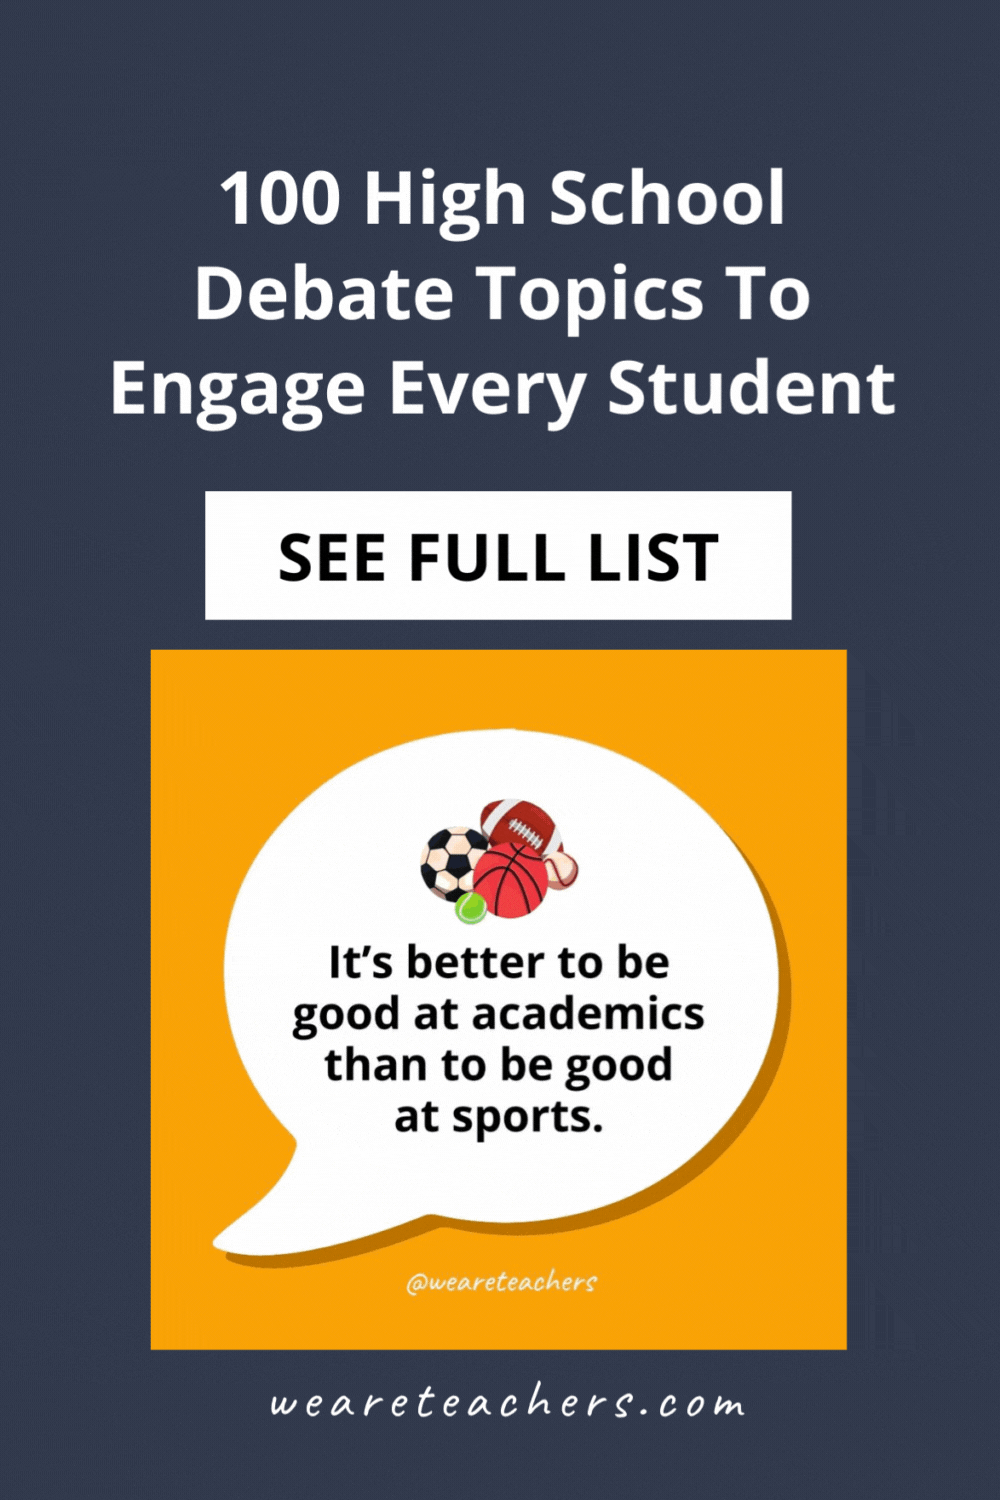 These high school debate topics range from fun and funny to complex and ethical, with links to reliable pro/con sources for each.